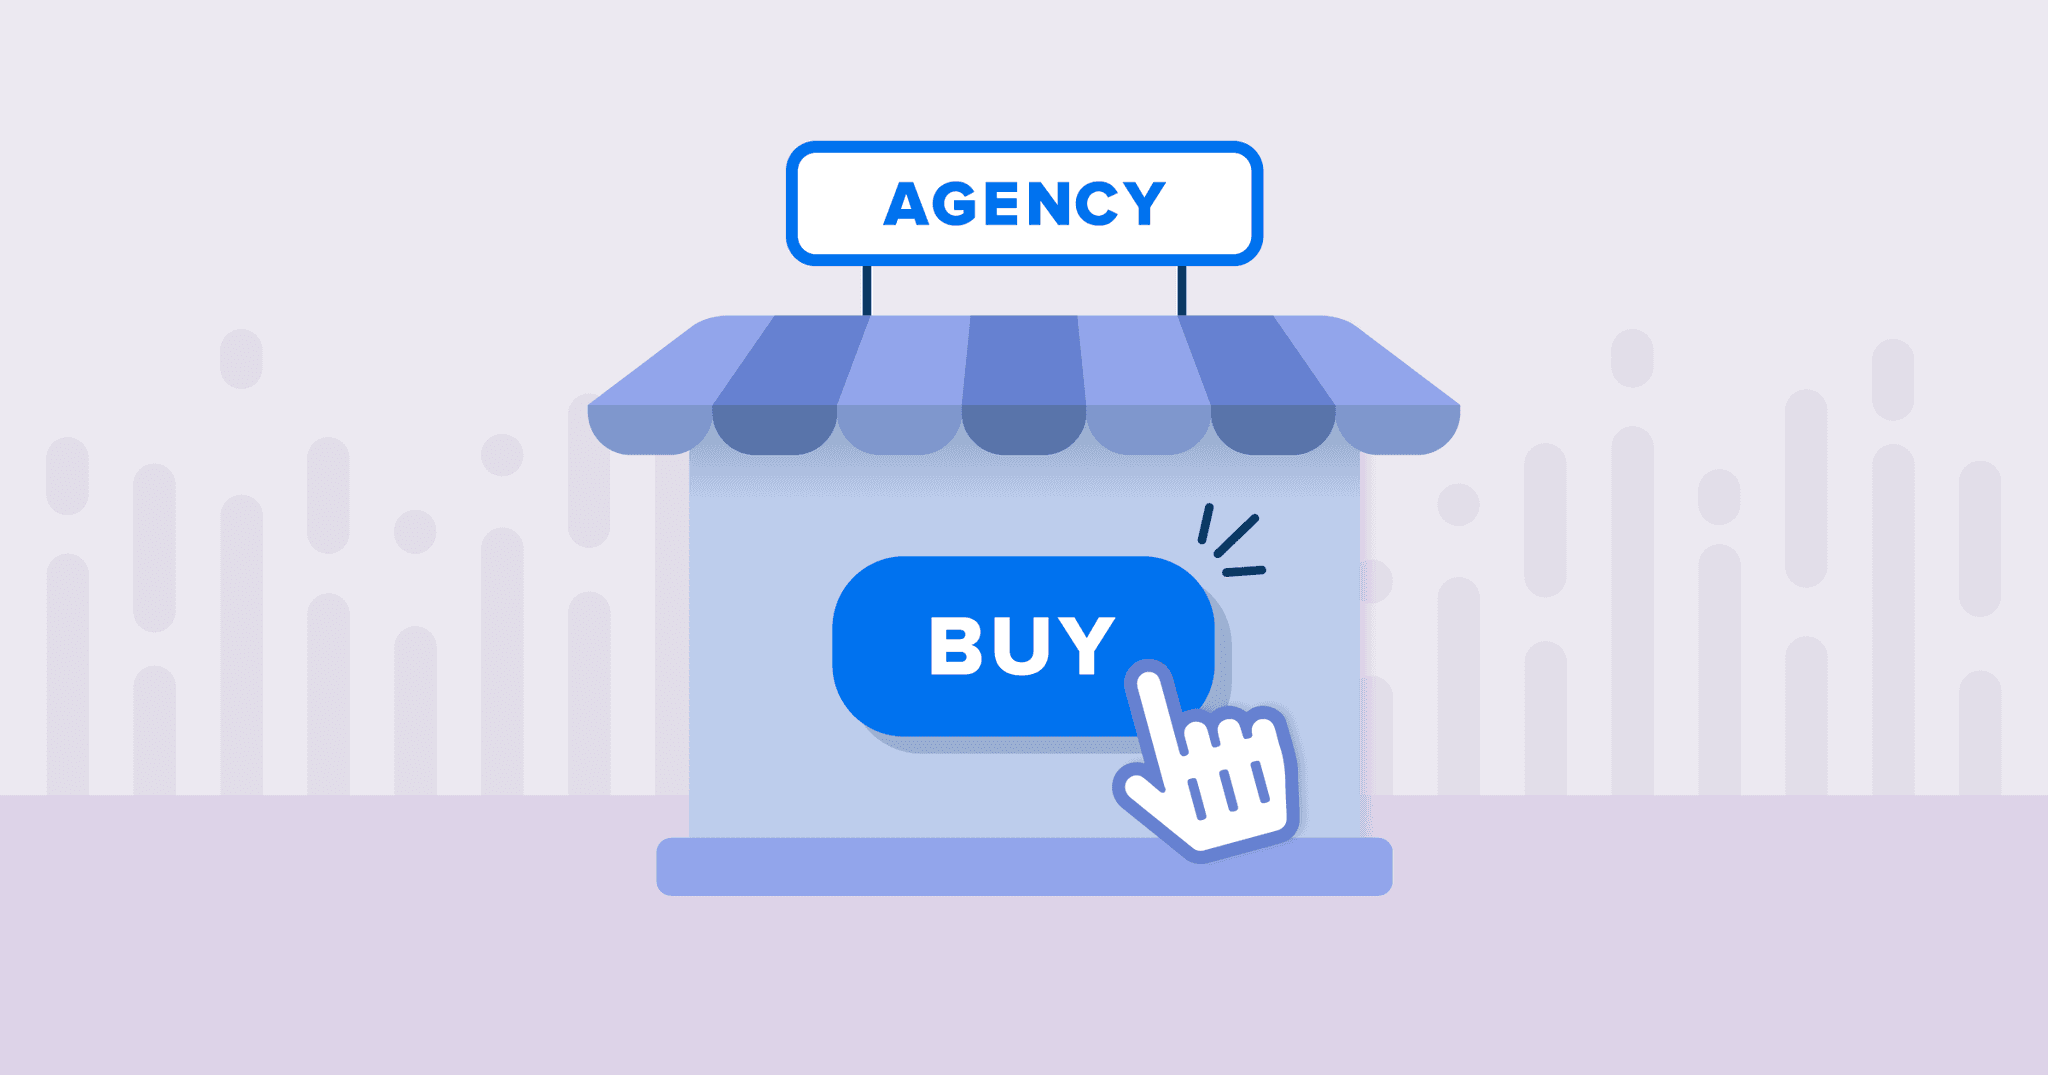  Hero image for buying a Marketing Agency showing a mouse clicking on a company